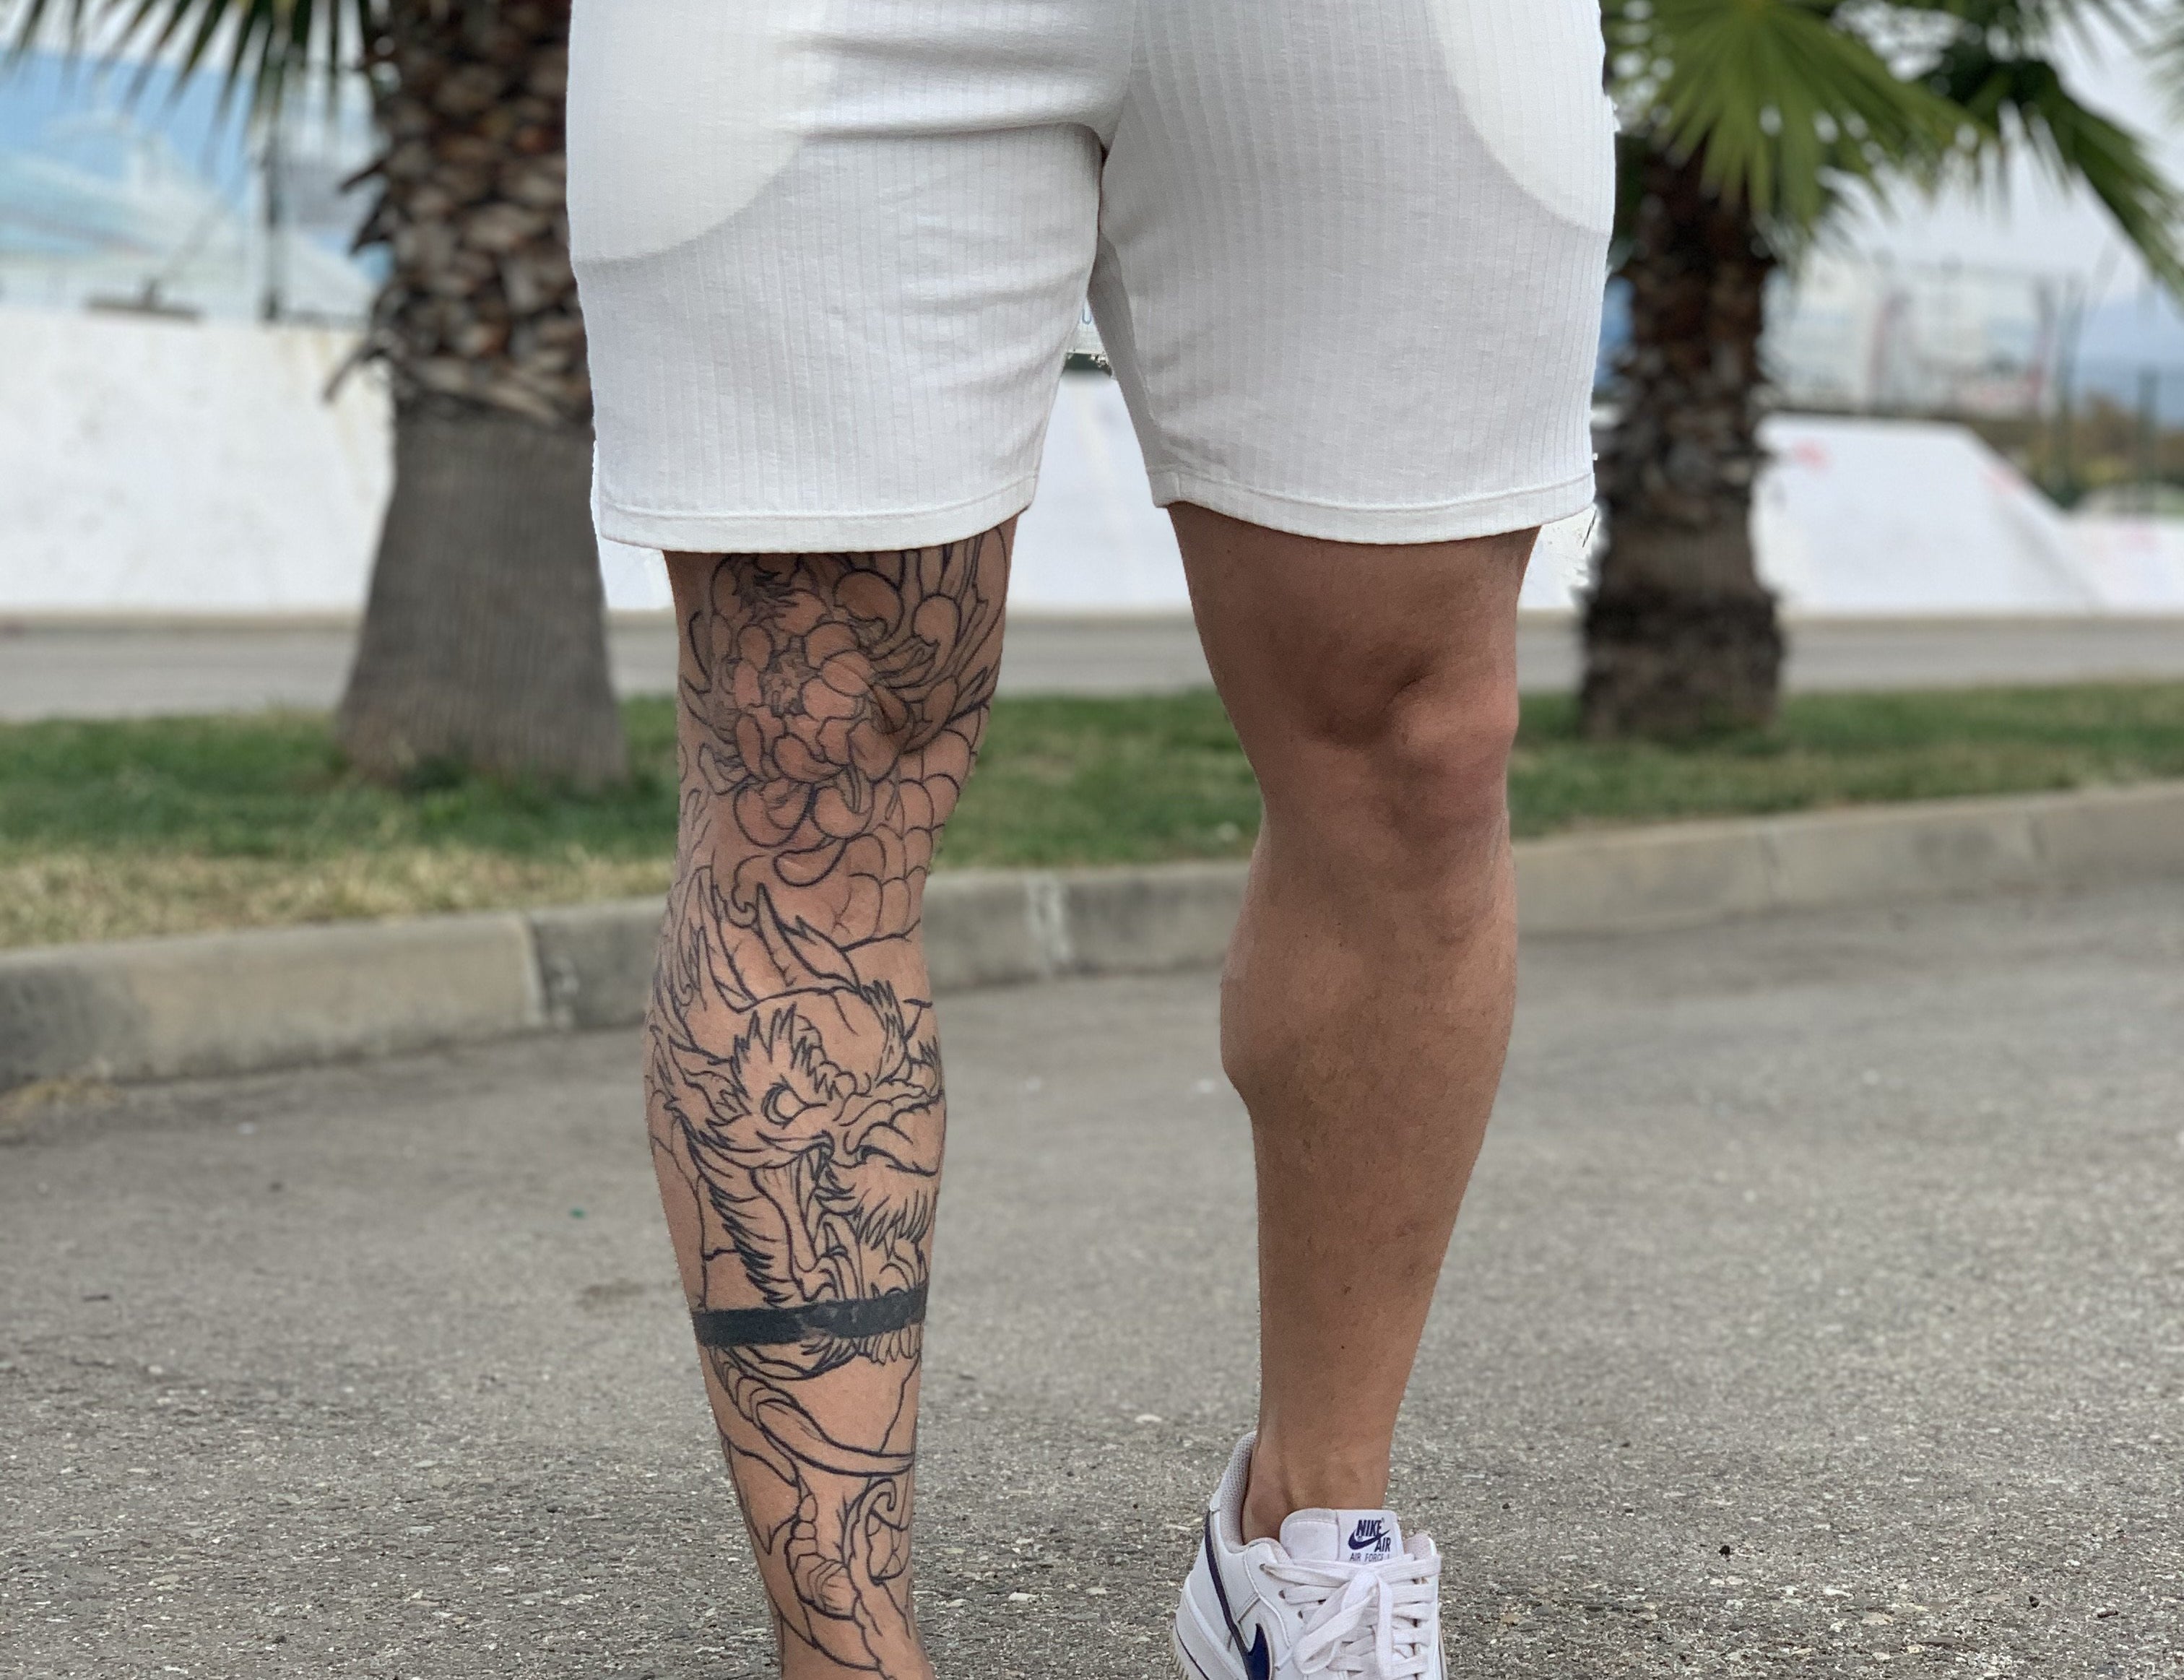 White Warrior - White Shorts for Men (PRE-ORDER DISPATCH DATE 1 JUIN 2021) - Sarman Fashion - Wholesale Clothing Fashion Brand for Men from Canada